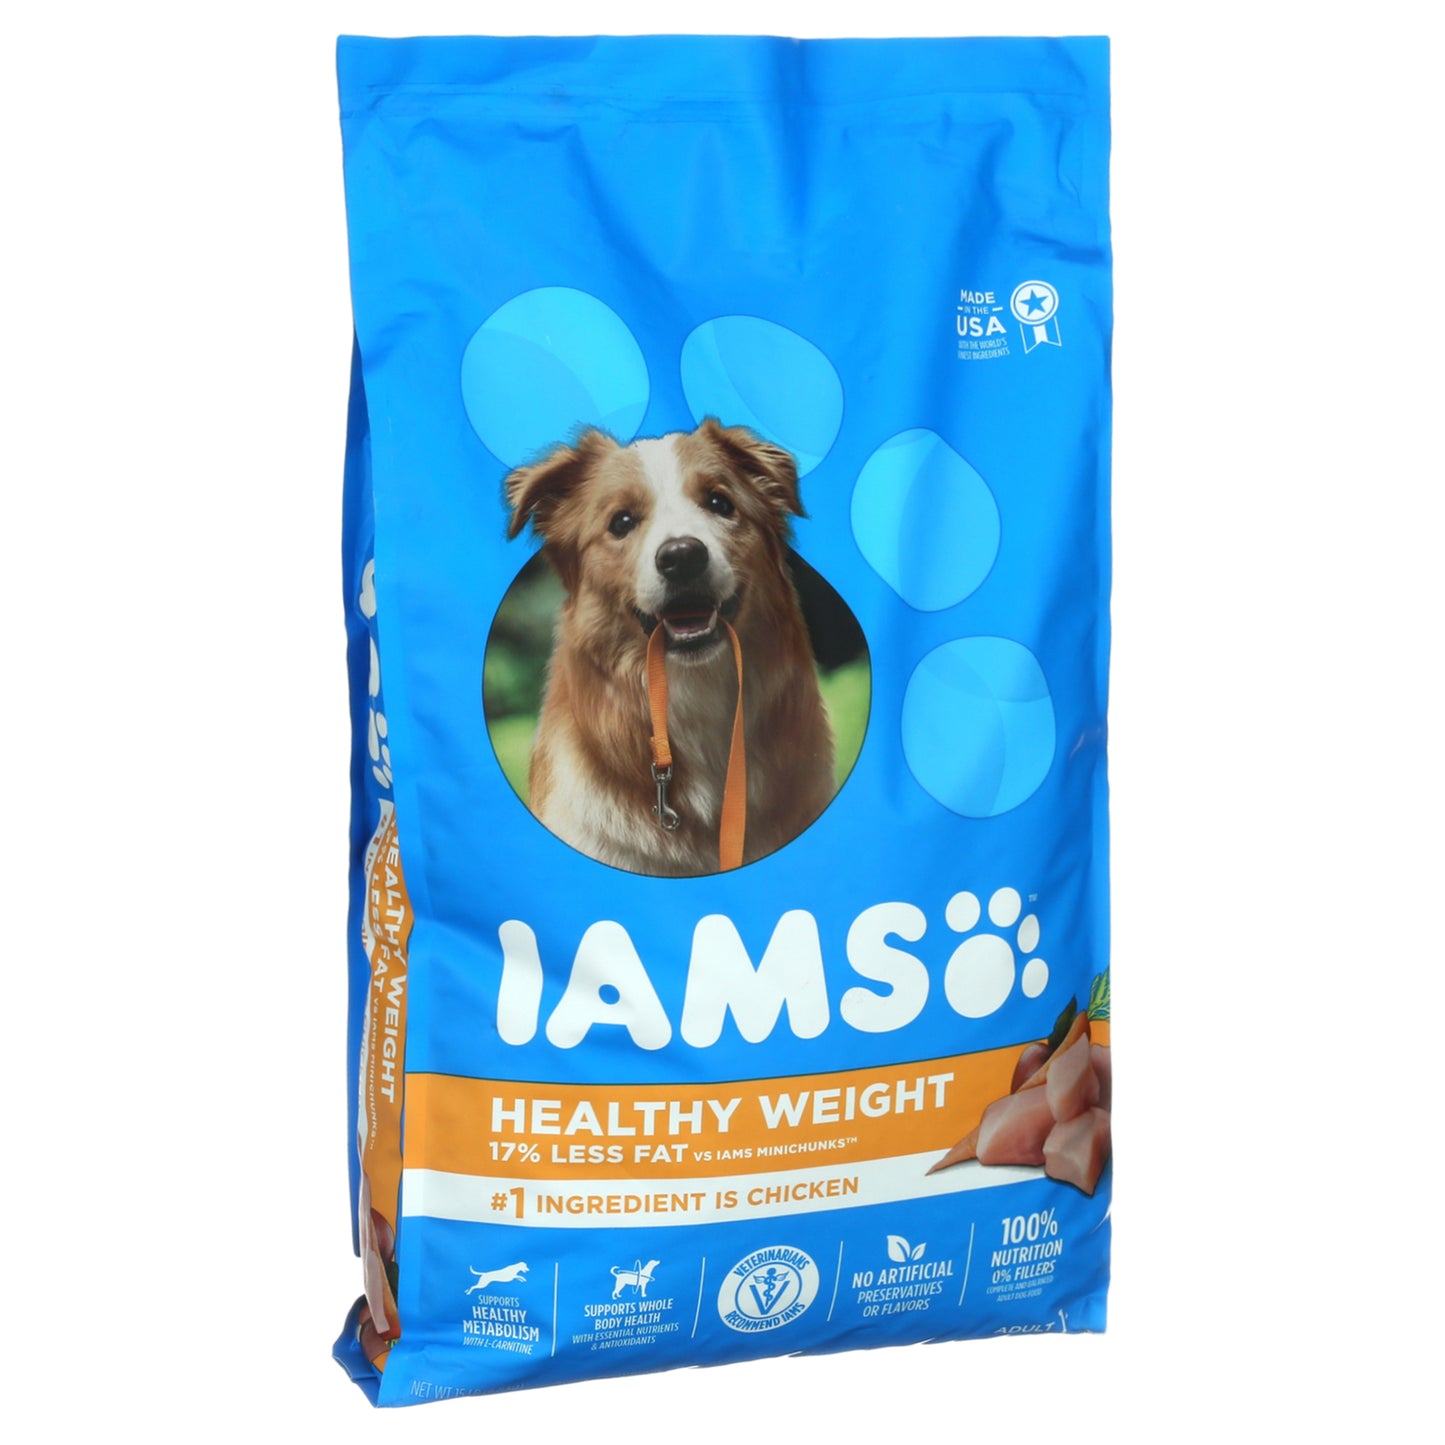 IAMS Healthy Weight Chicken Dry Dog Food for Adult Dog, 15 Lb Bag